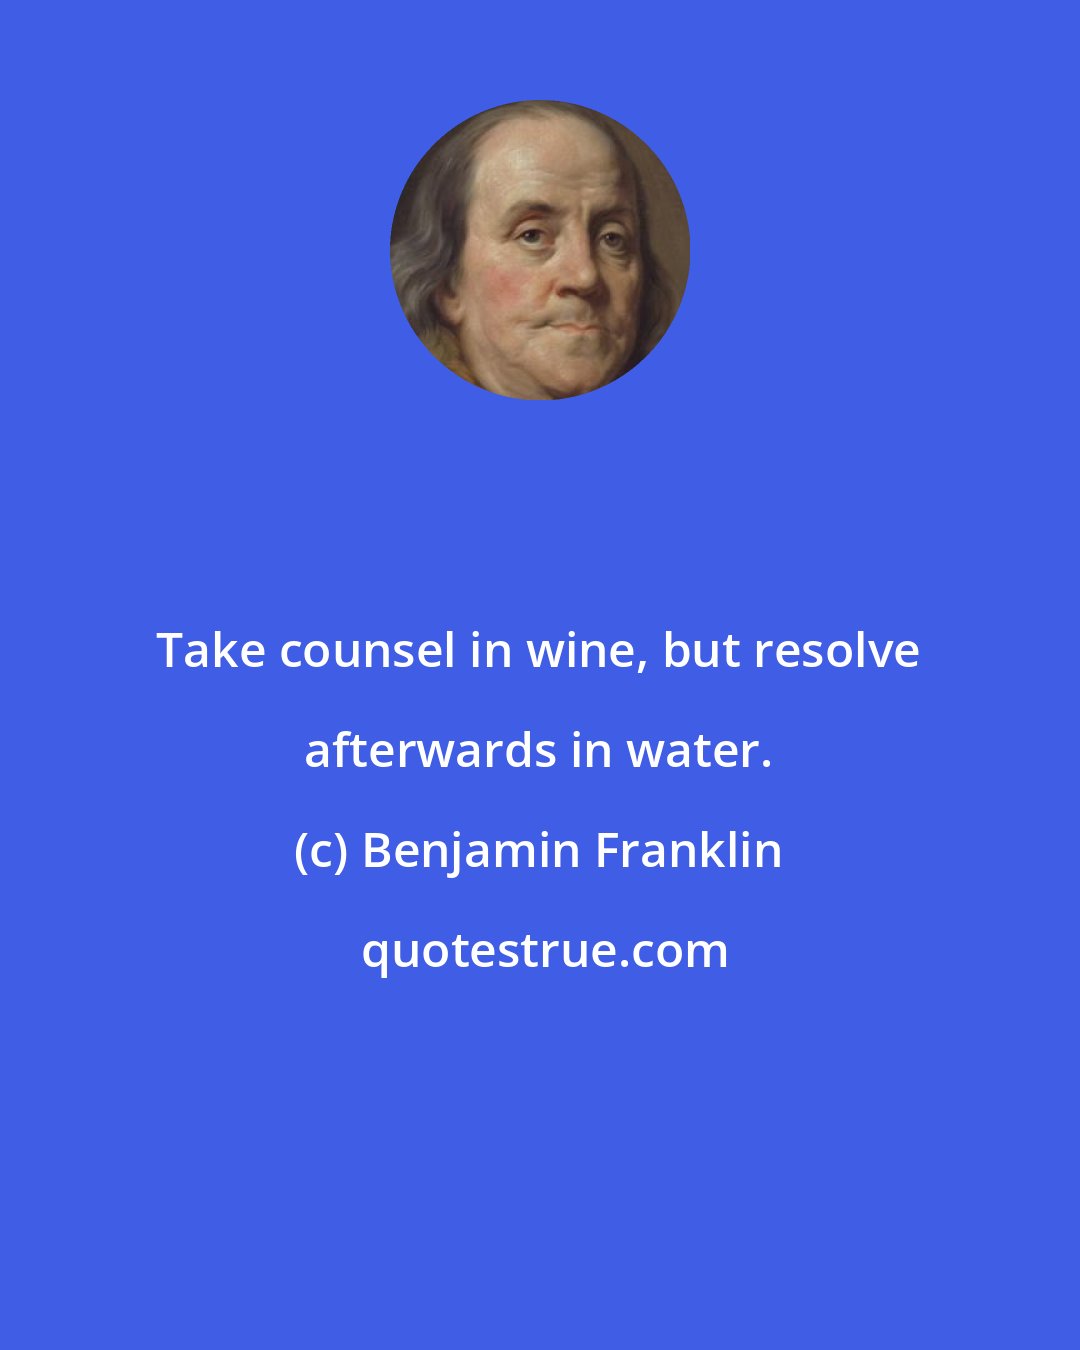 Benjamin Franklin: Take counsel in wine, but resolve afterwards in water.